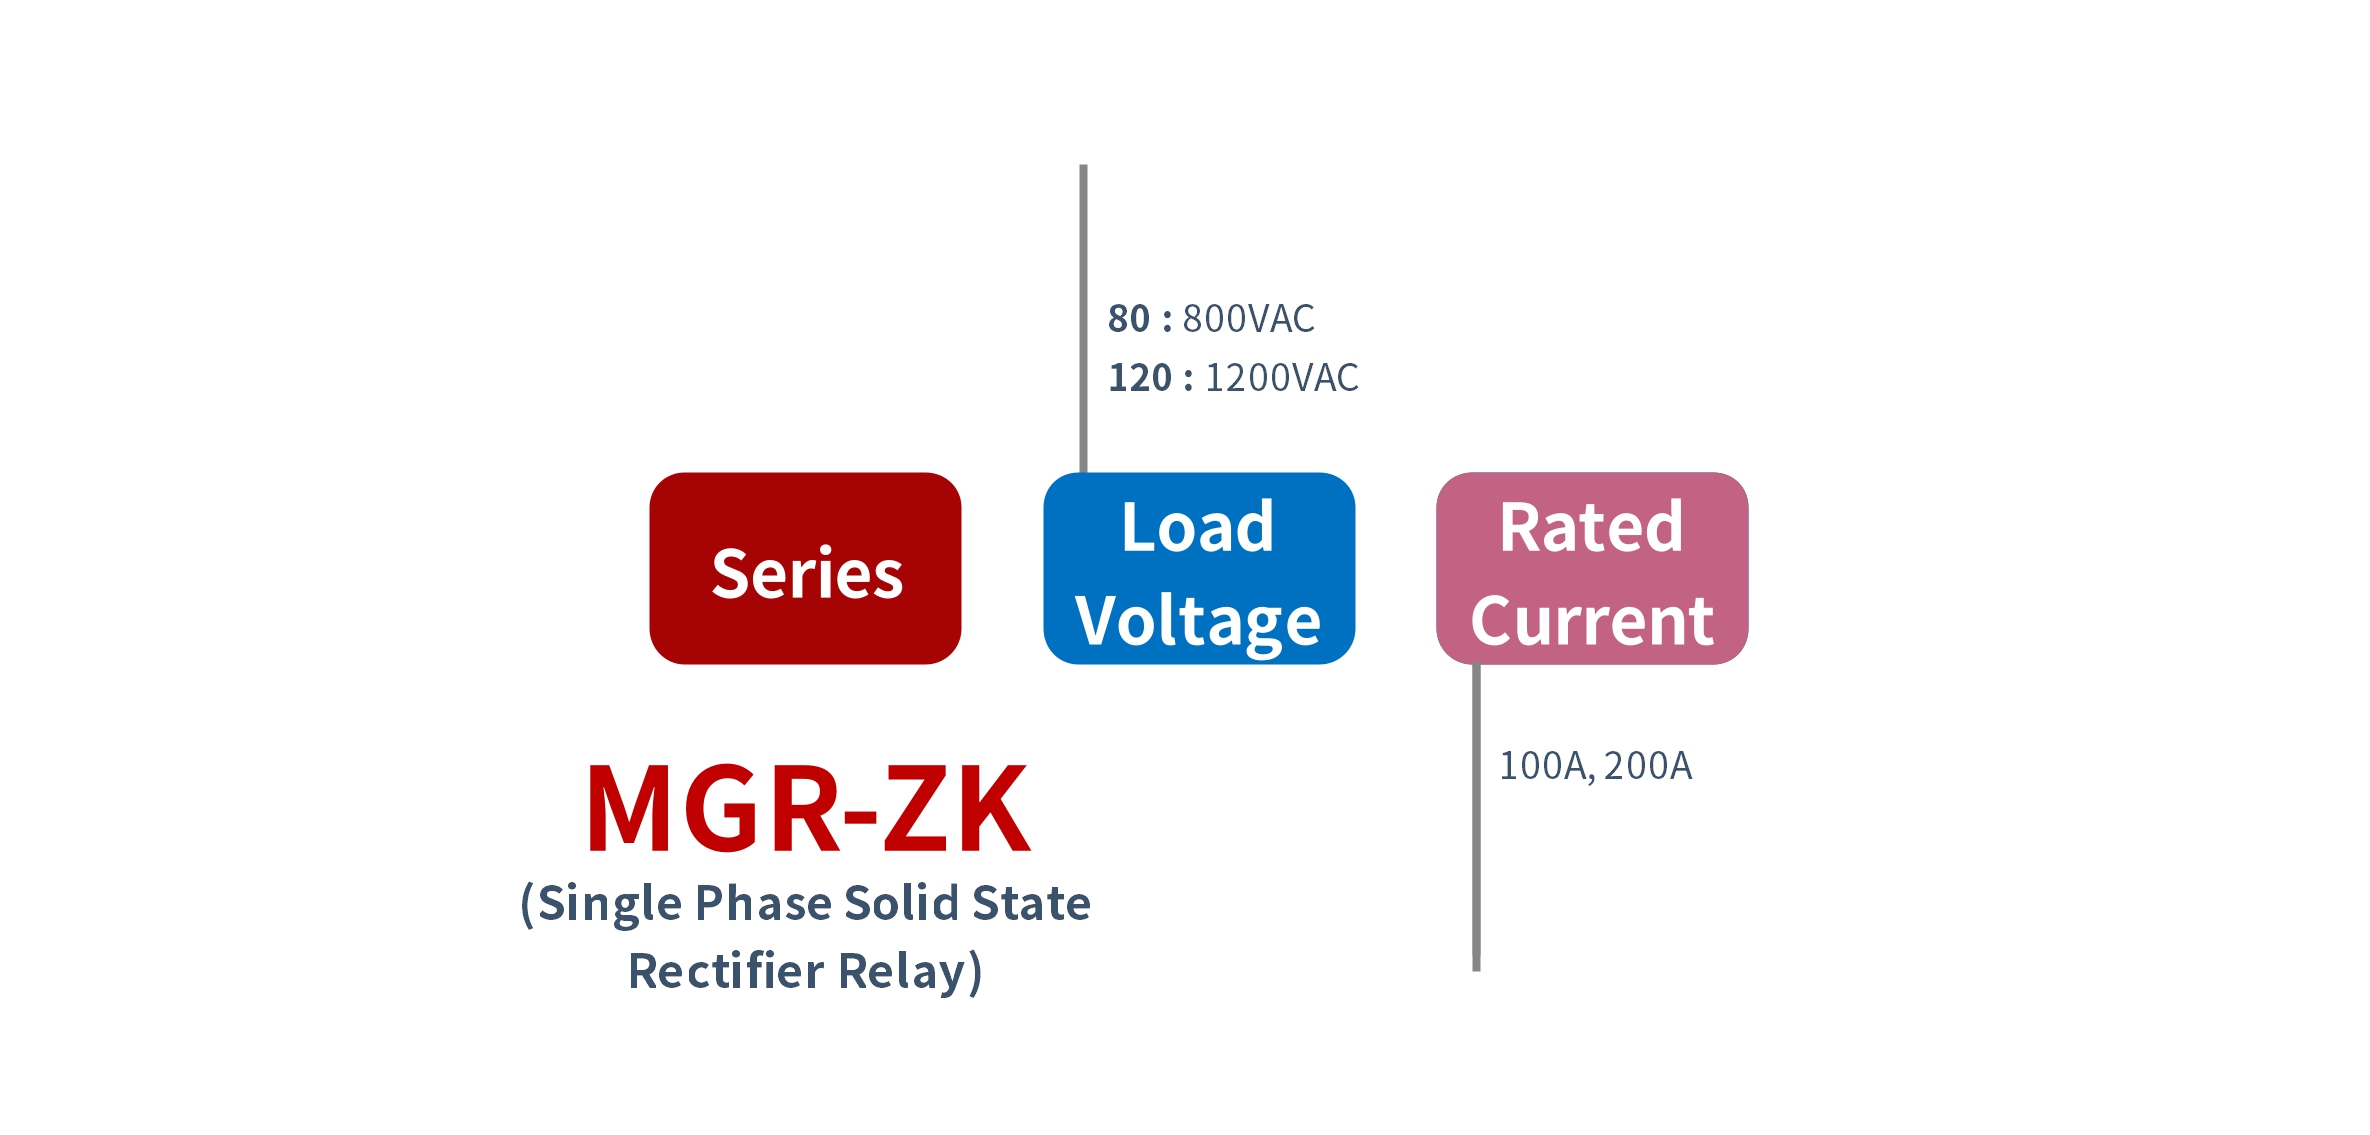 How to order MGR-ZK Series Solid State Rectifier